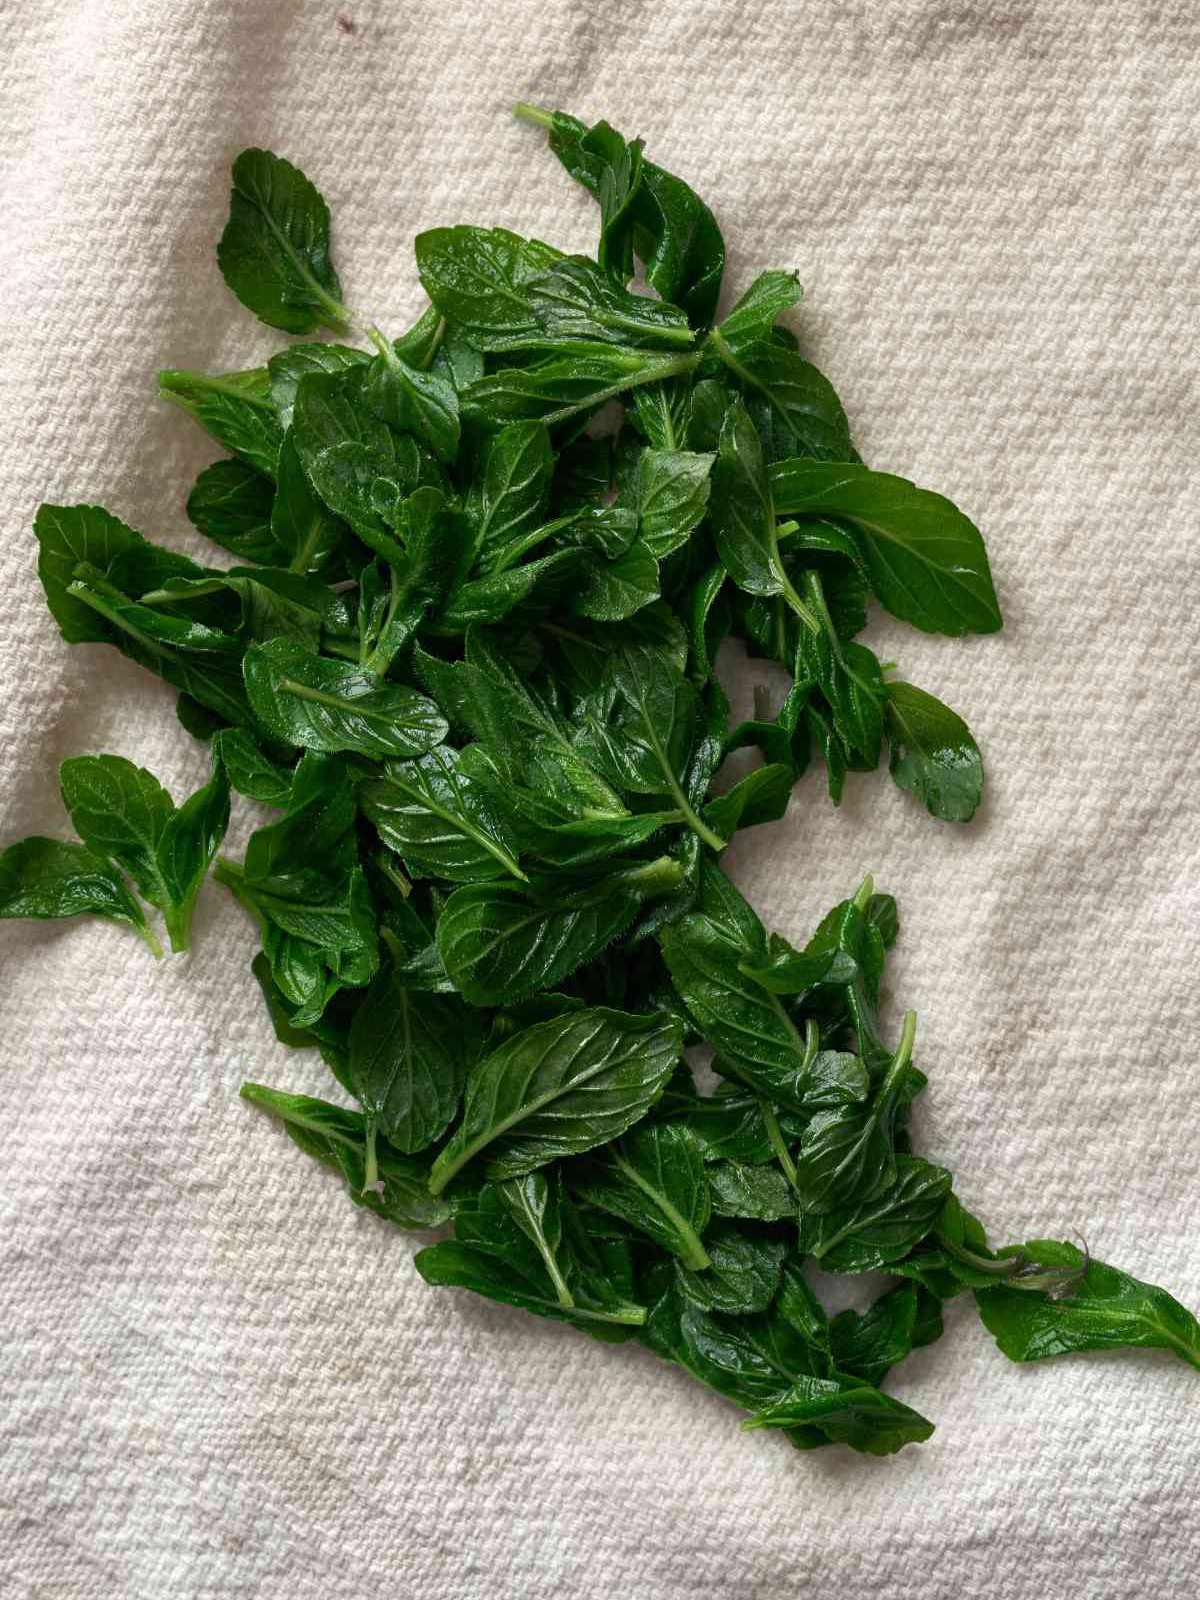 Blanched mint leaves on a white kitchen towel.